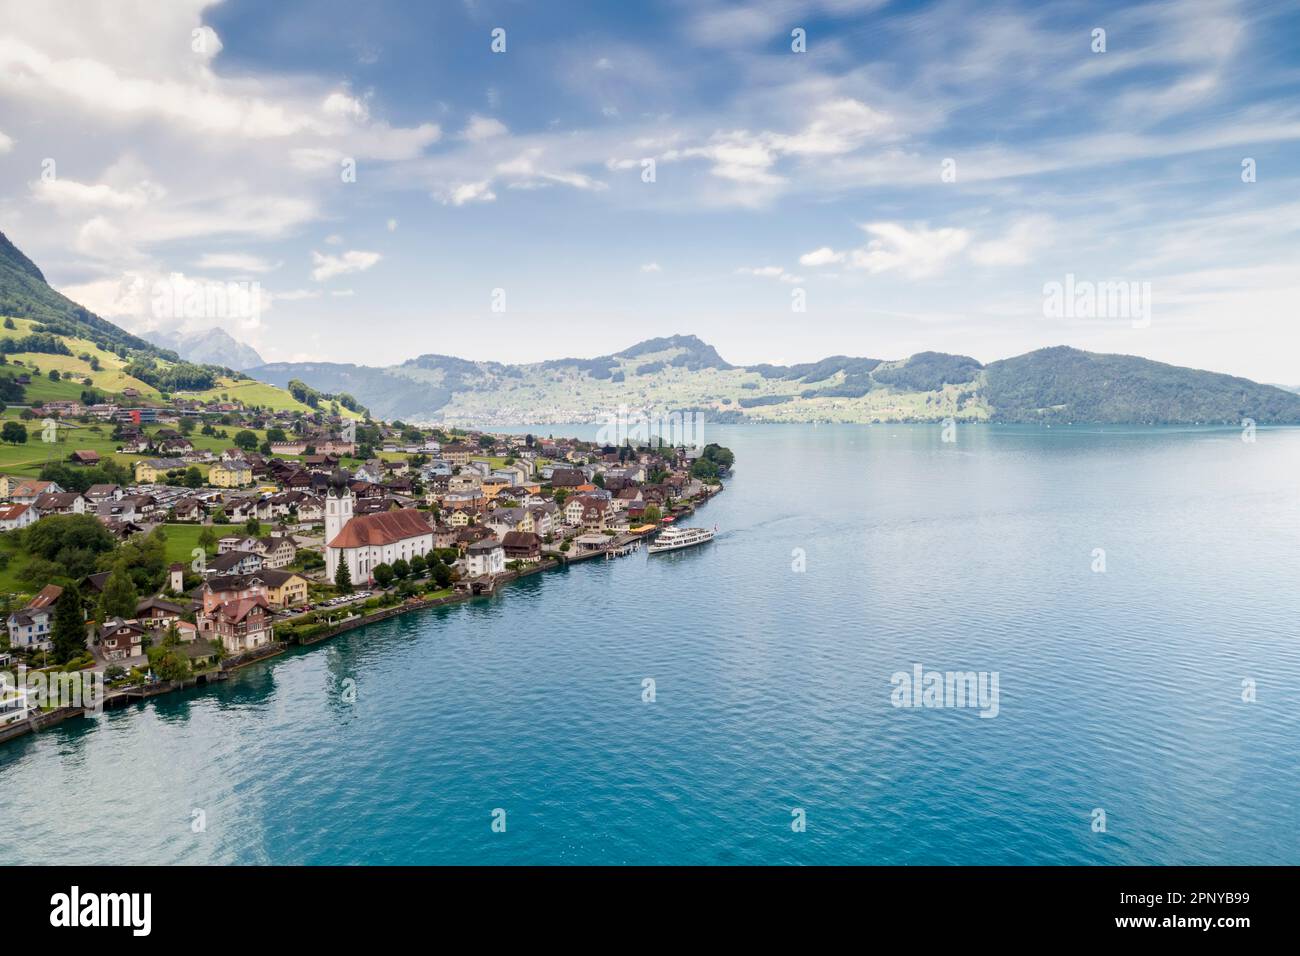 Aerial view of Beckenried on Lake Lucern, Switzerland Stock Photo